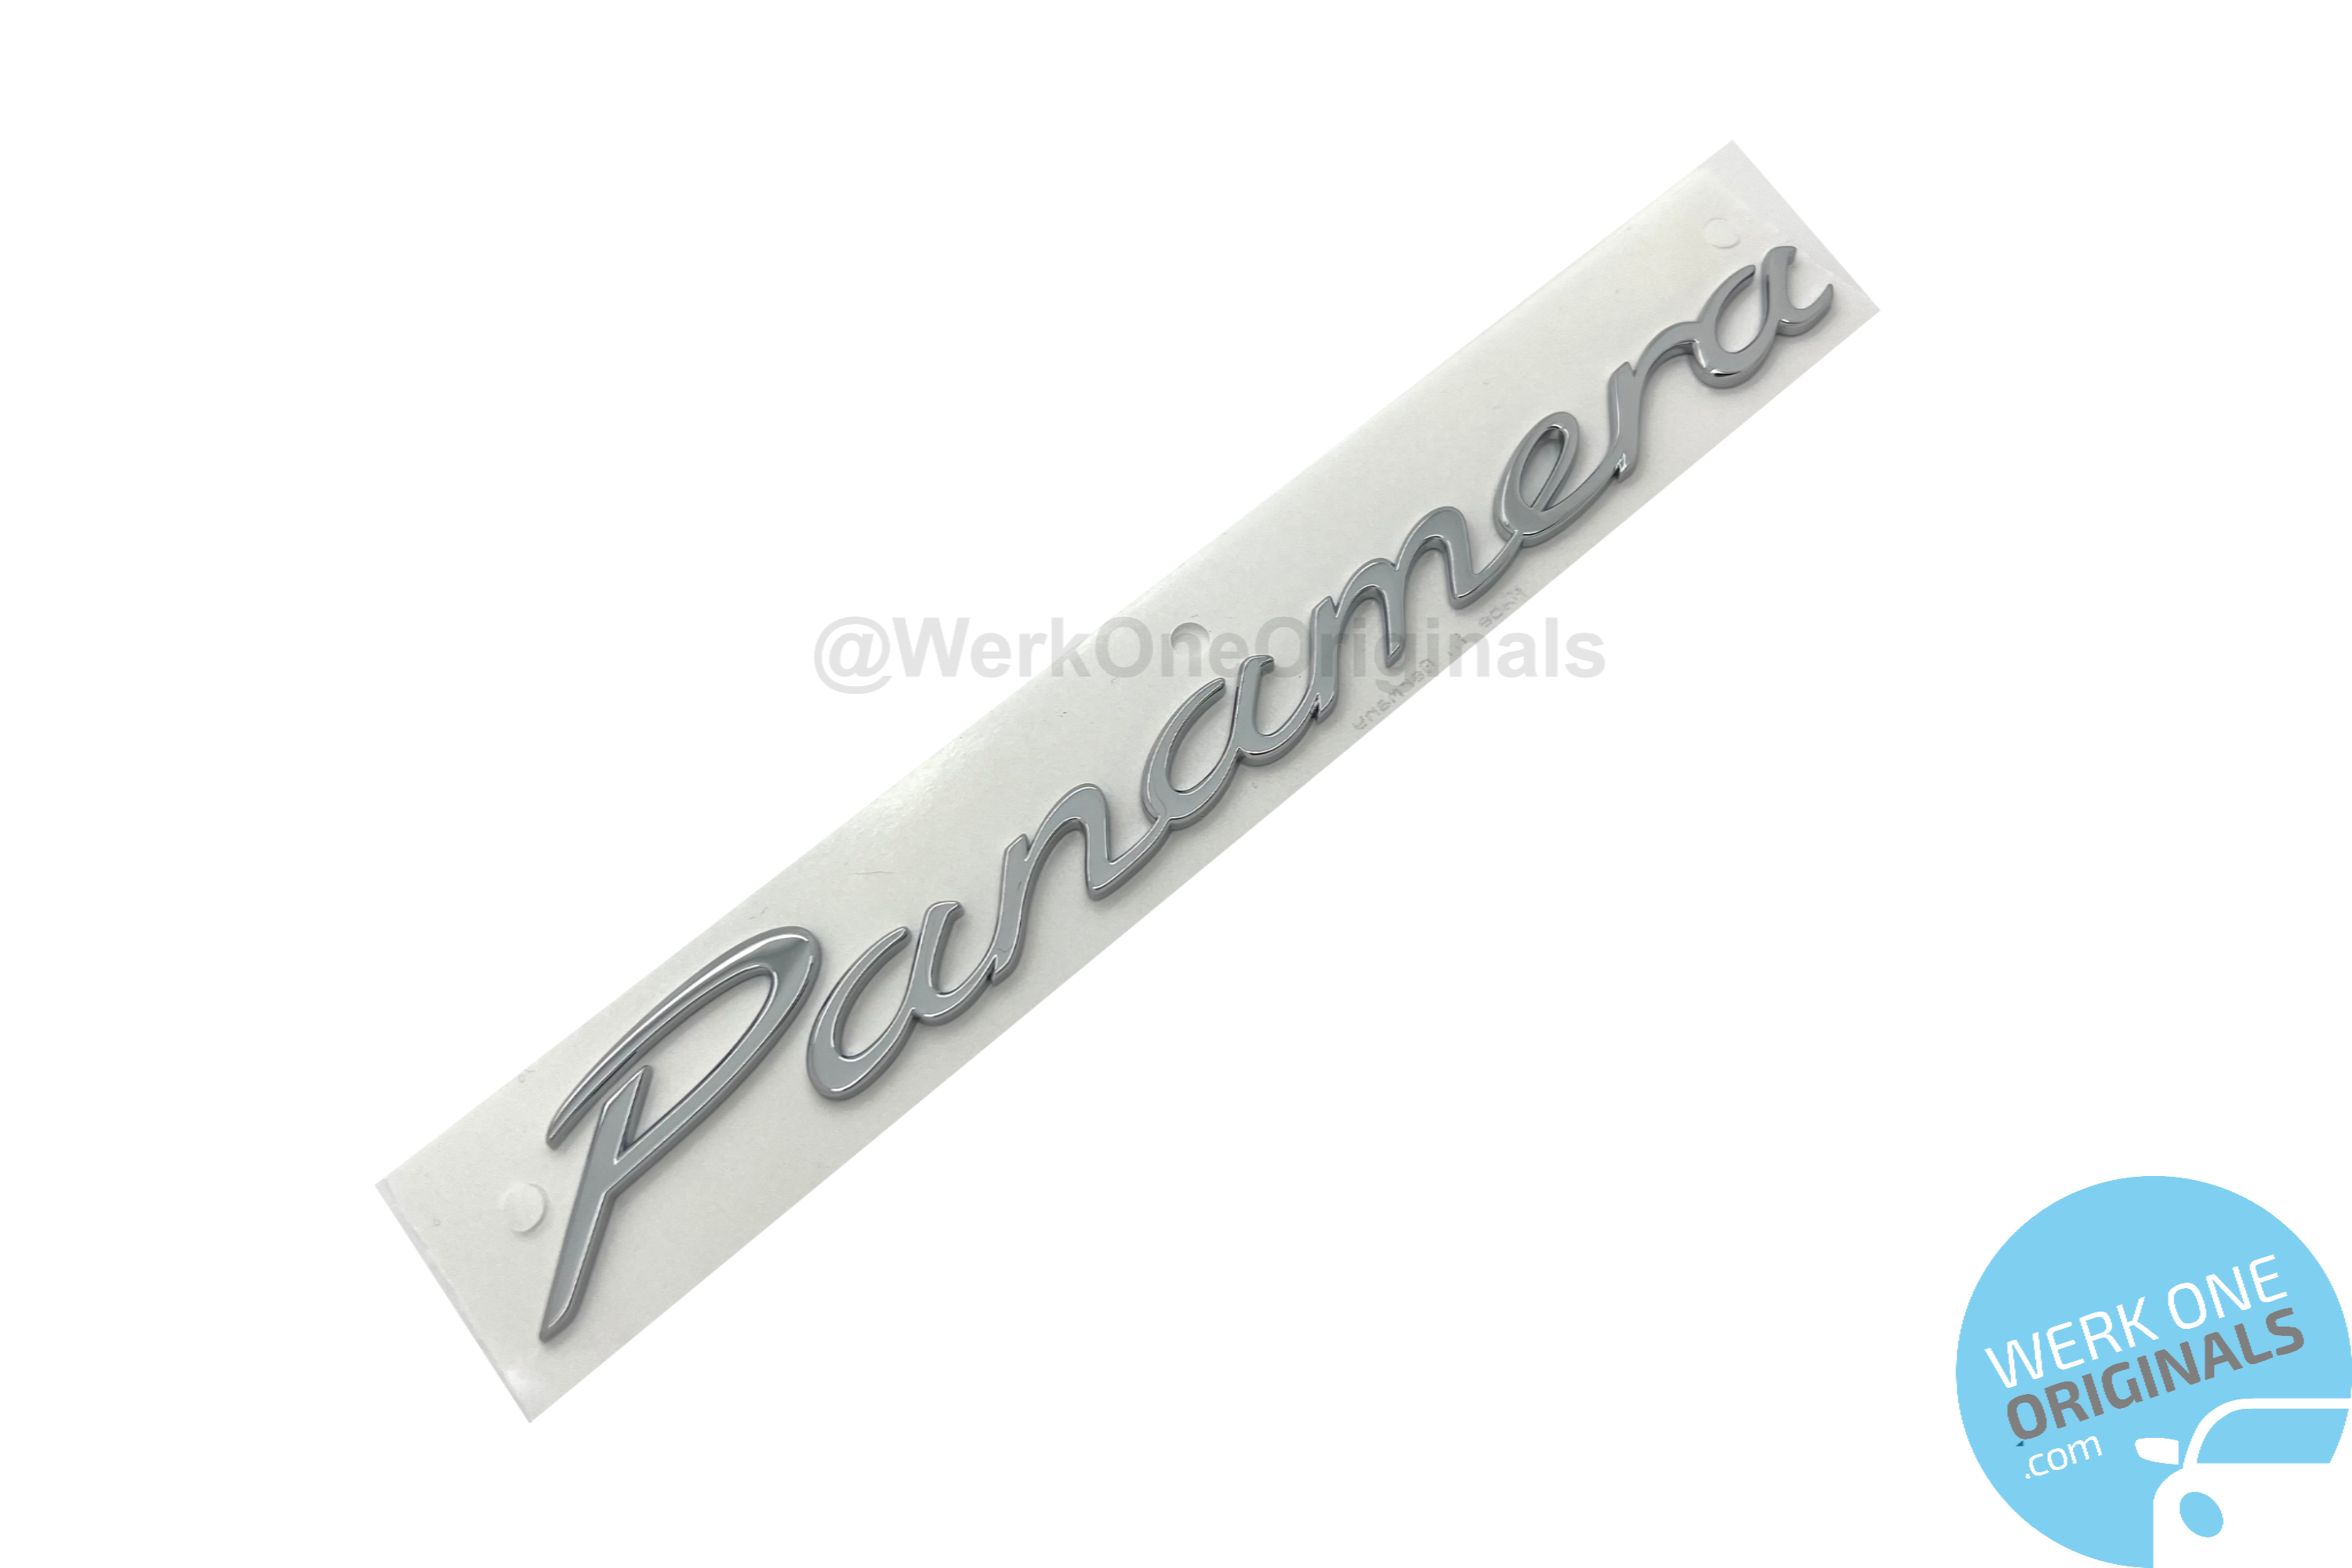 Porsche Official 'Panamera 4S' Rear Badge Decal in Chrome Silver for Panamera 4S Type 907 & 970 Models